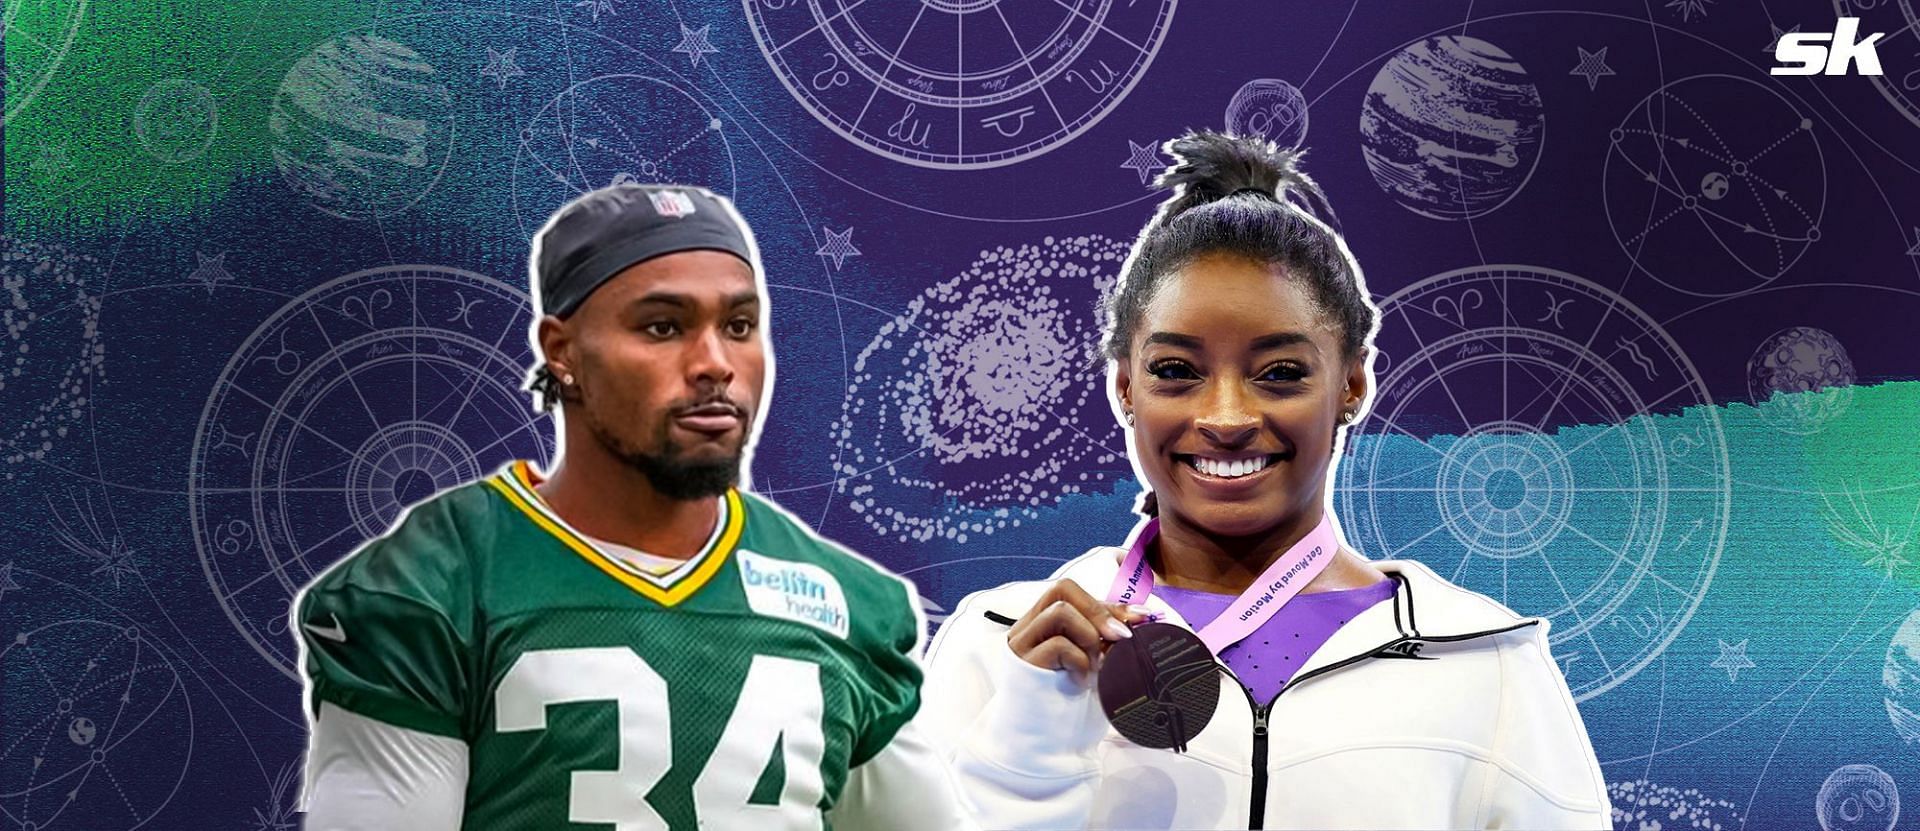 Jonathan Owens and wife Simone Biles&rsquo; birth chart goes viral as TikToker delves into astrology